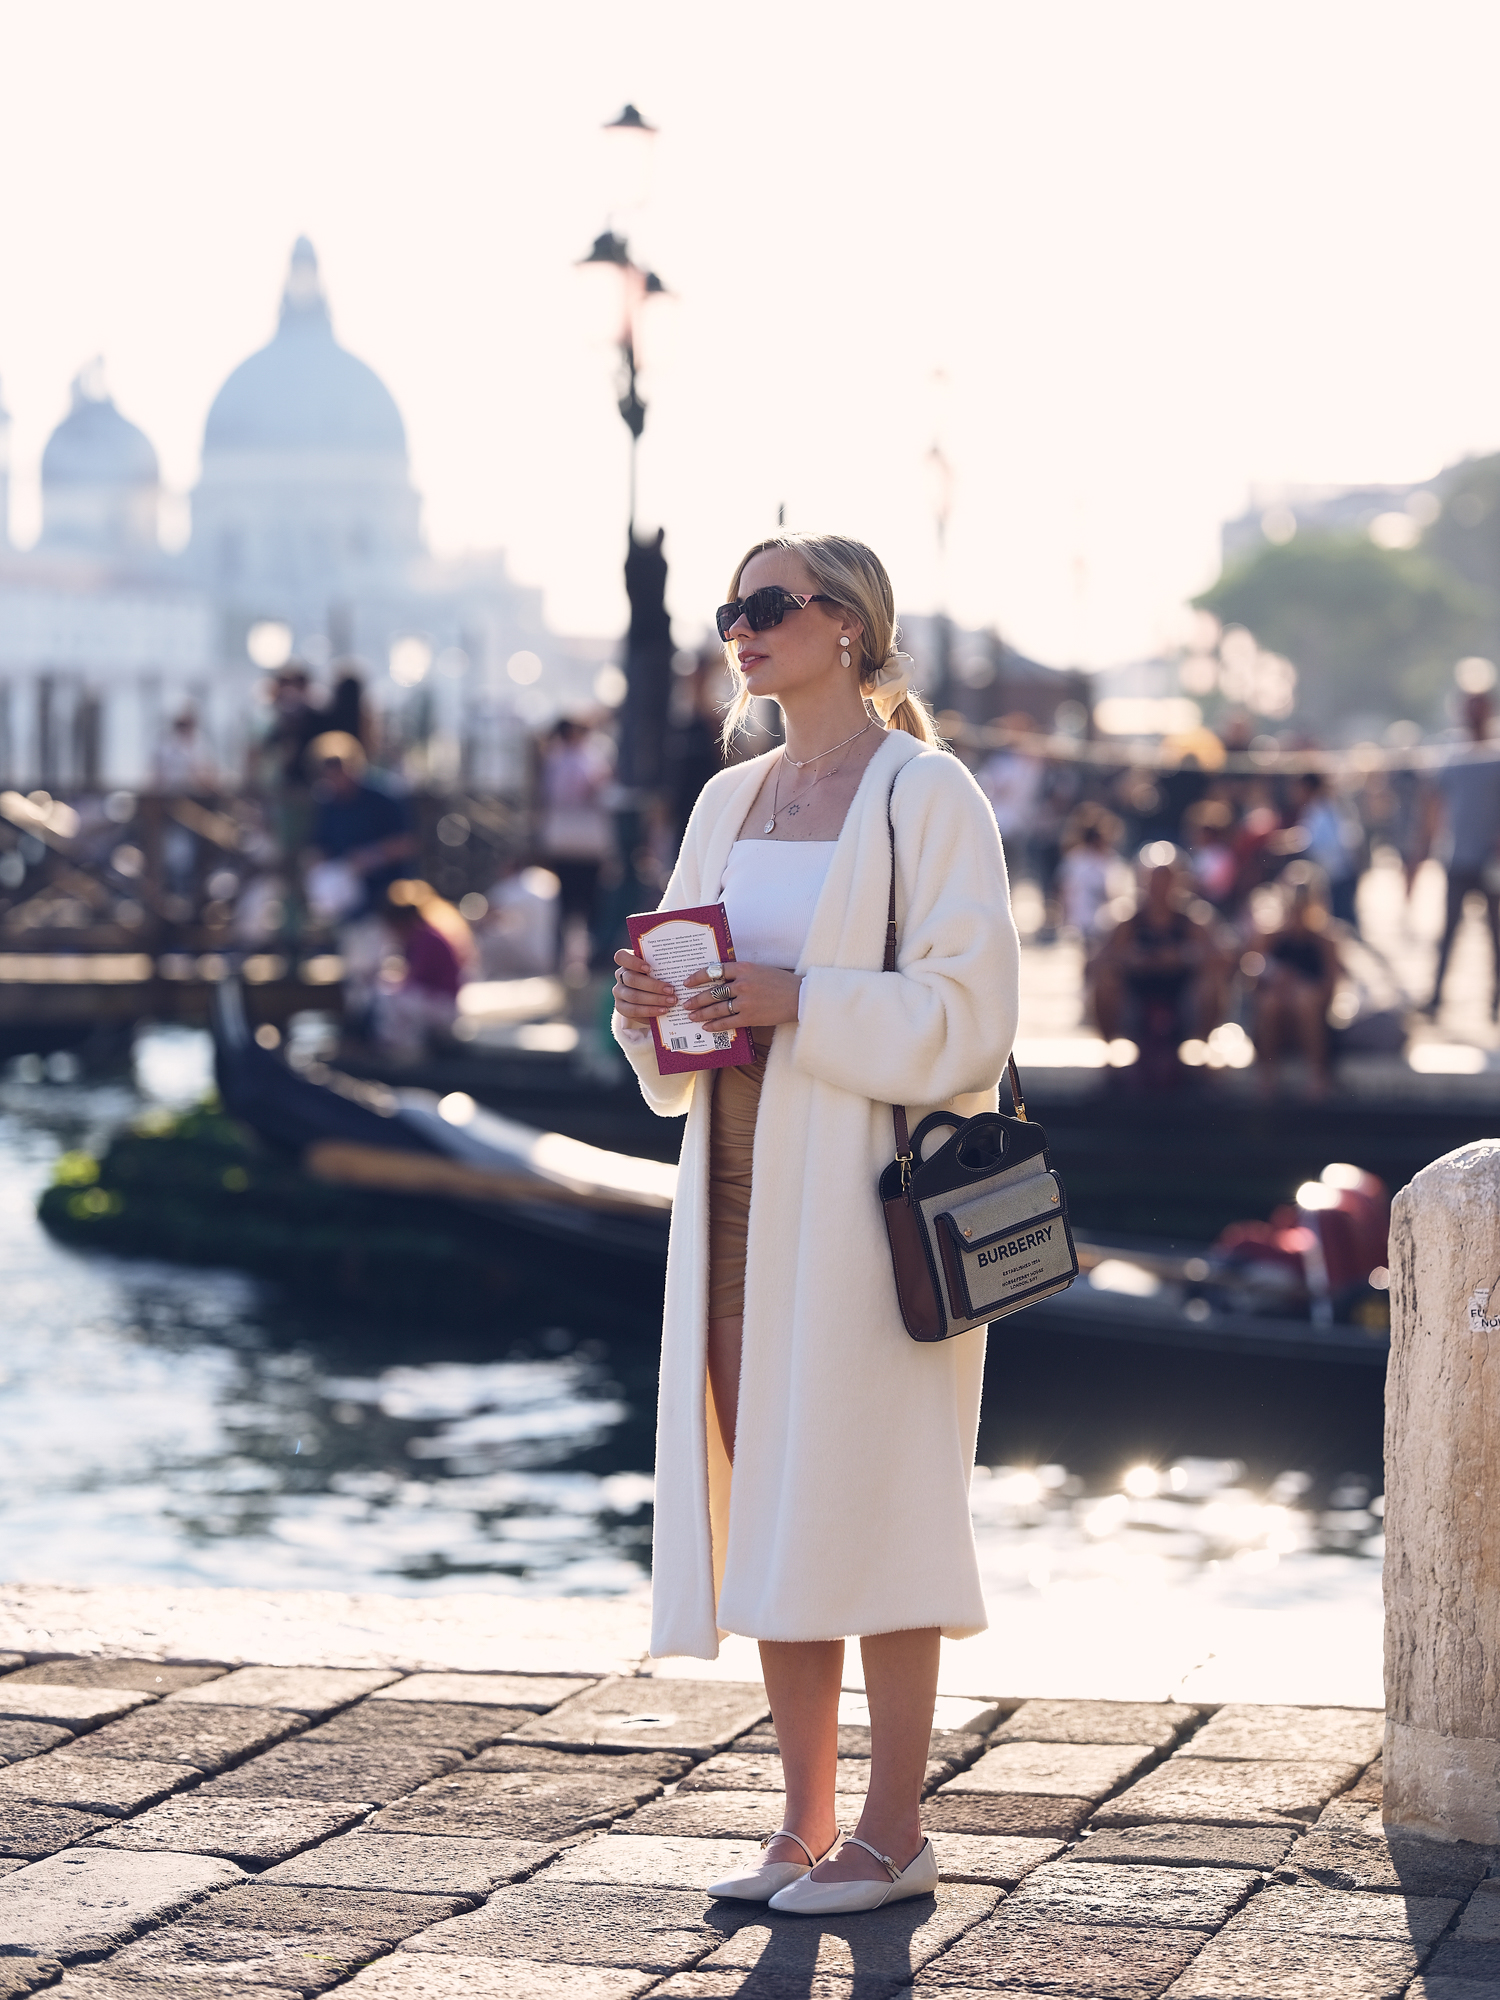 Ideas and locations for a portrait and blogger photoshoot by Venice photographer Alina Indi